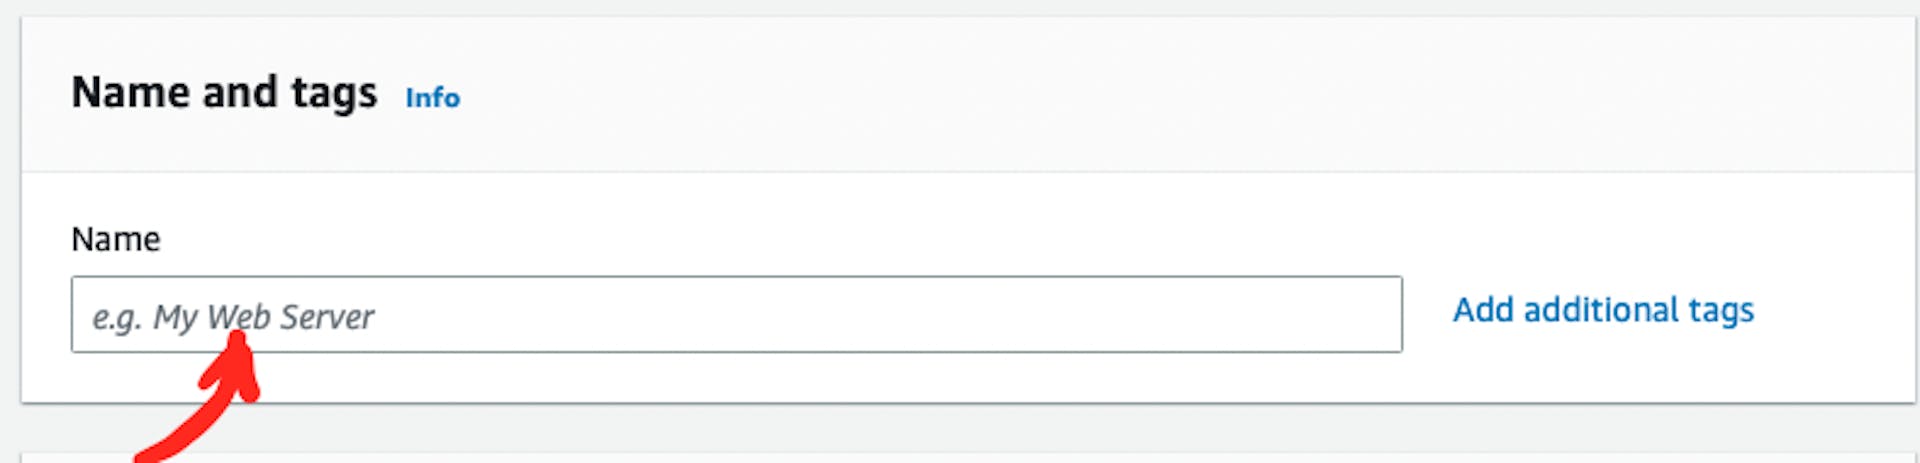 The screenshot of AWS web page with the pointer to "Name" input box in "Name and tags" section